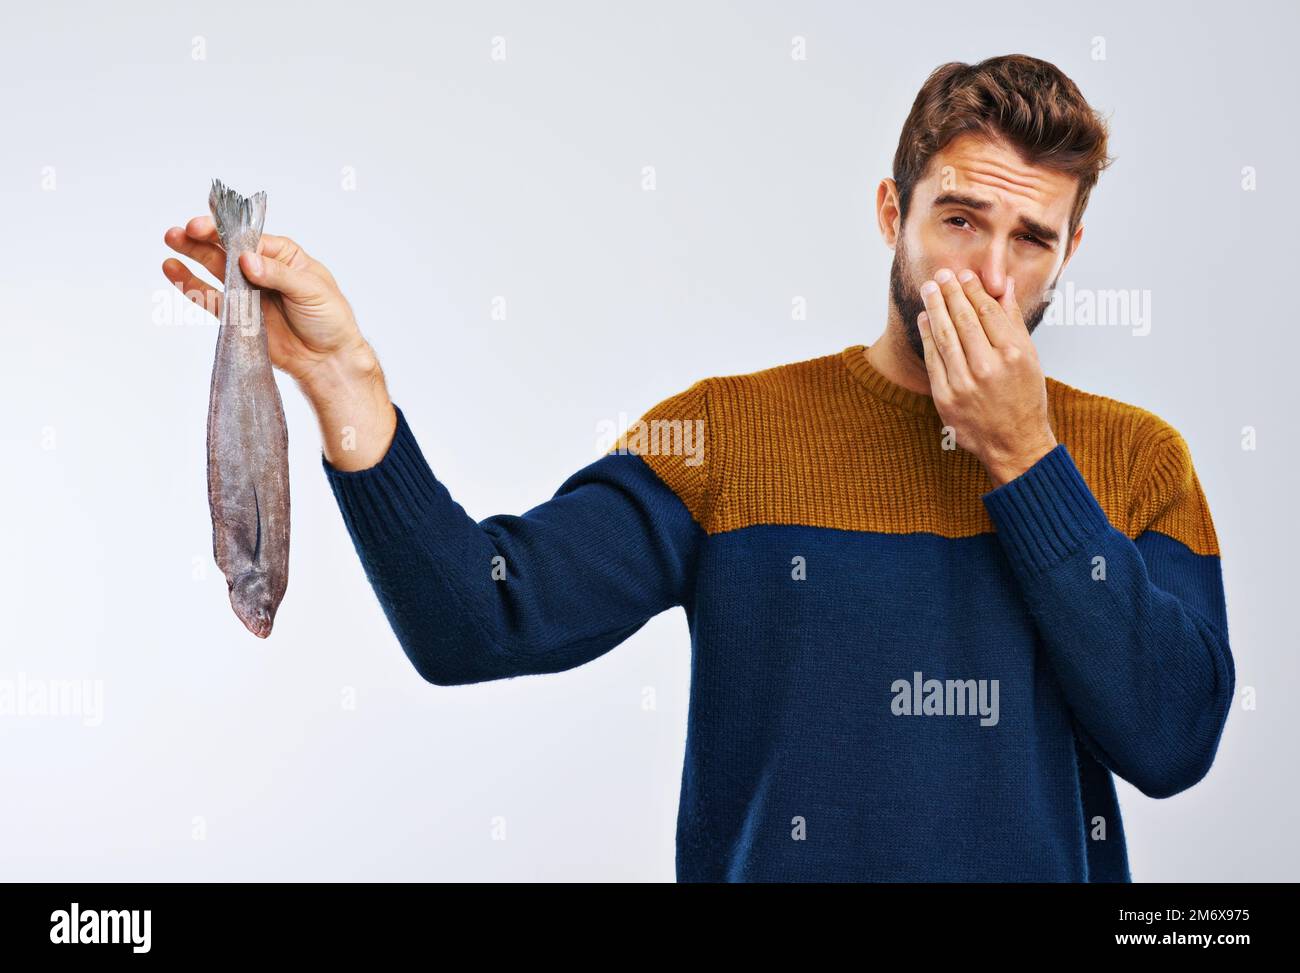 A fish by any other name would smell as gross. Studio shot of a man showing disgust while holding a smelly fish. Stock Photo